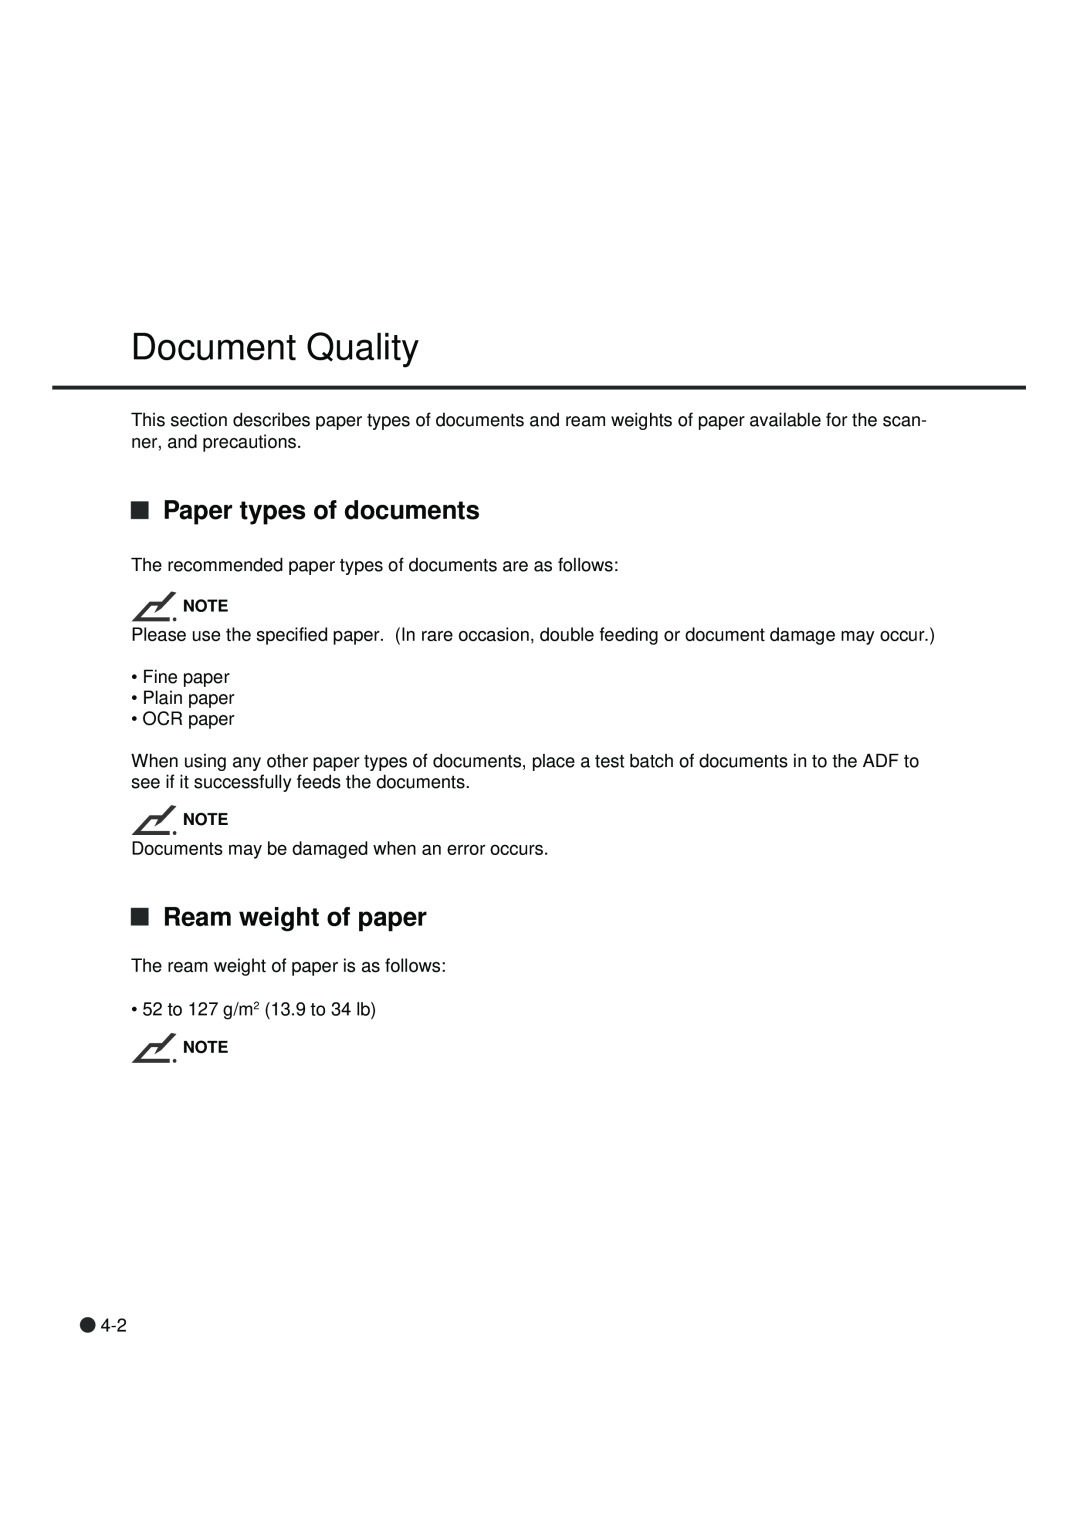 Fujitsu fi-4990C manual Document Quality, Paper types of documents, Ream weight of paper 